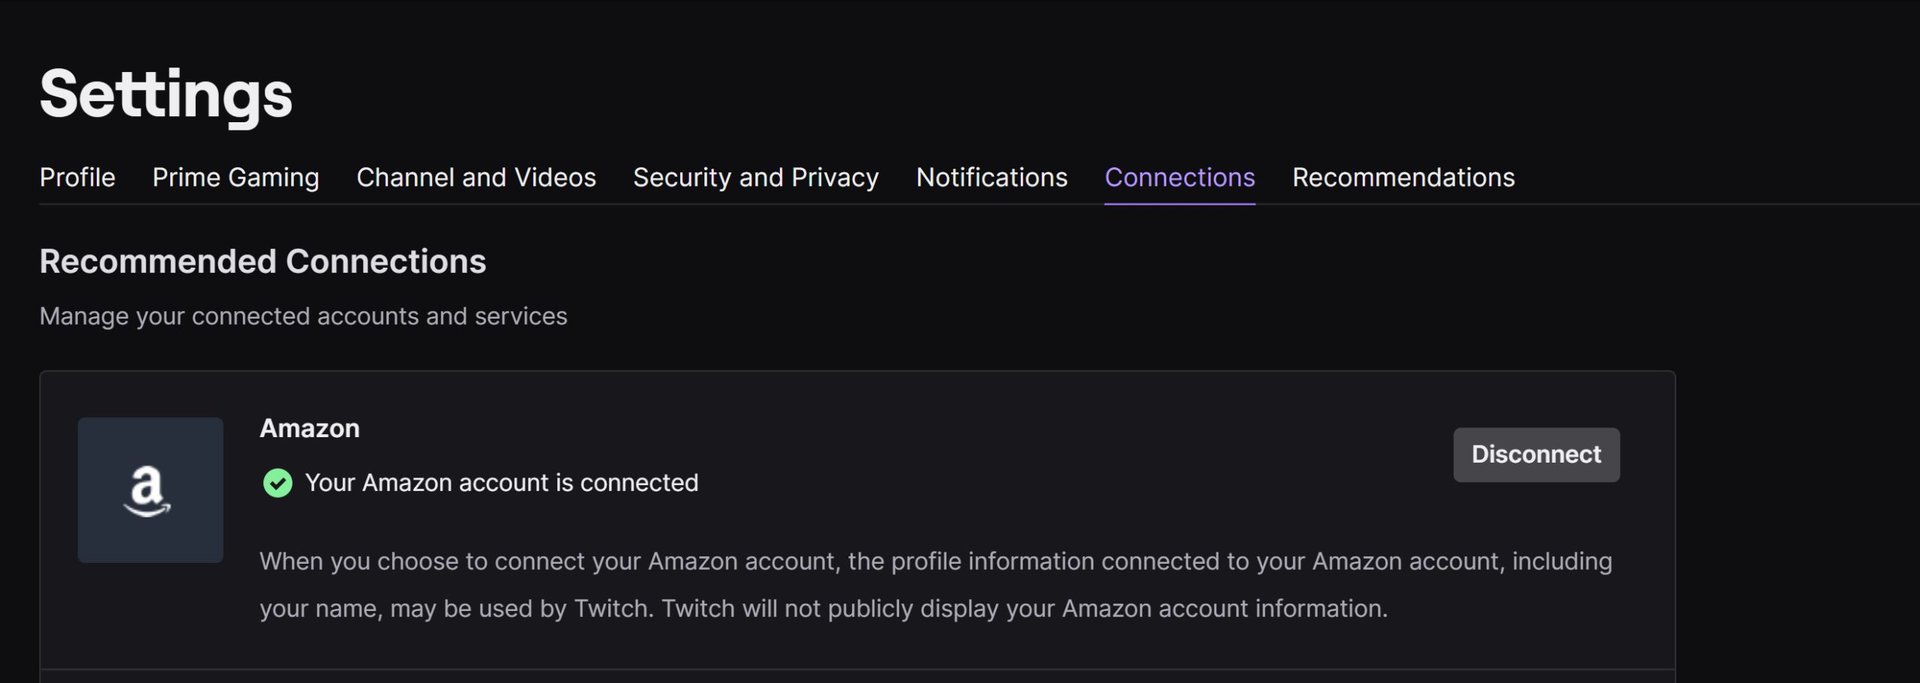 unlink amazon on twitch settings and connections tab